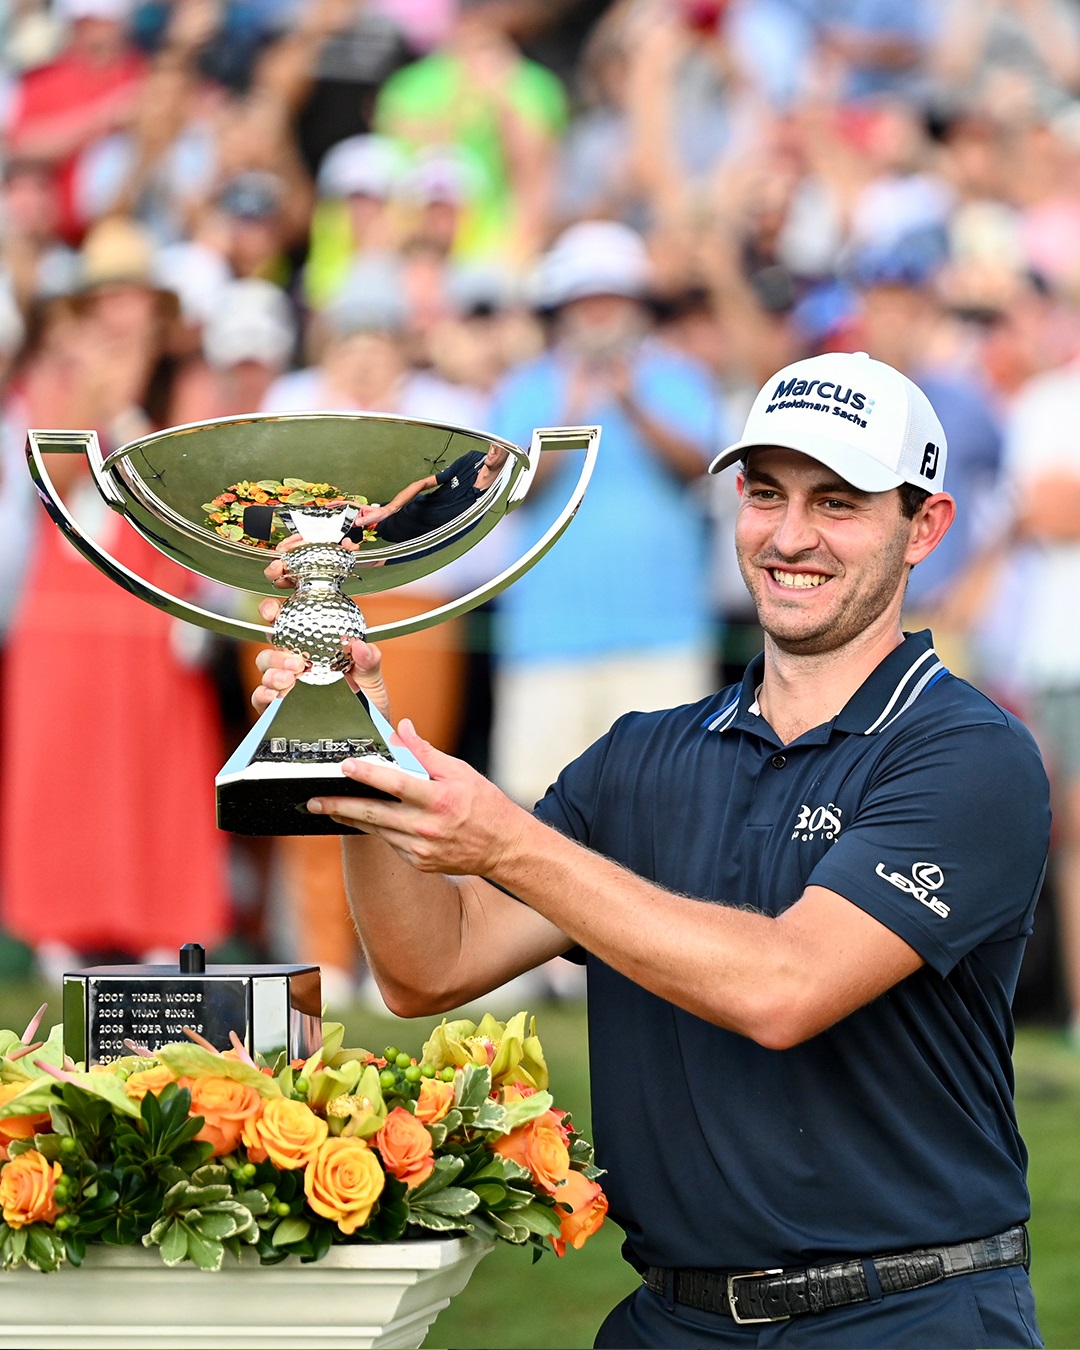 Golf – Patrick Cantlay wins the 2021 FedEx Cup and a $ 15 million verify